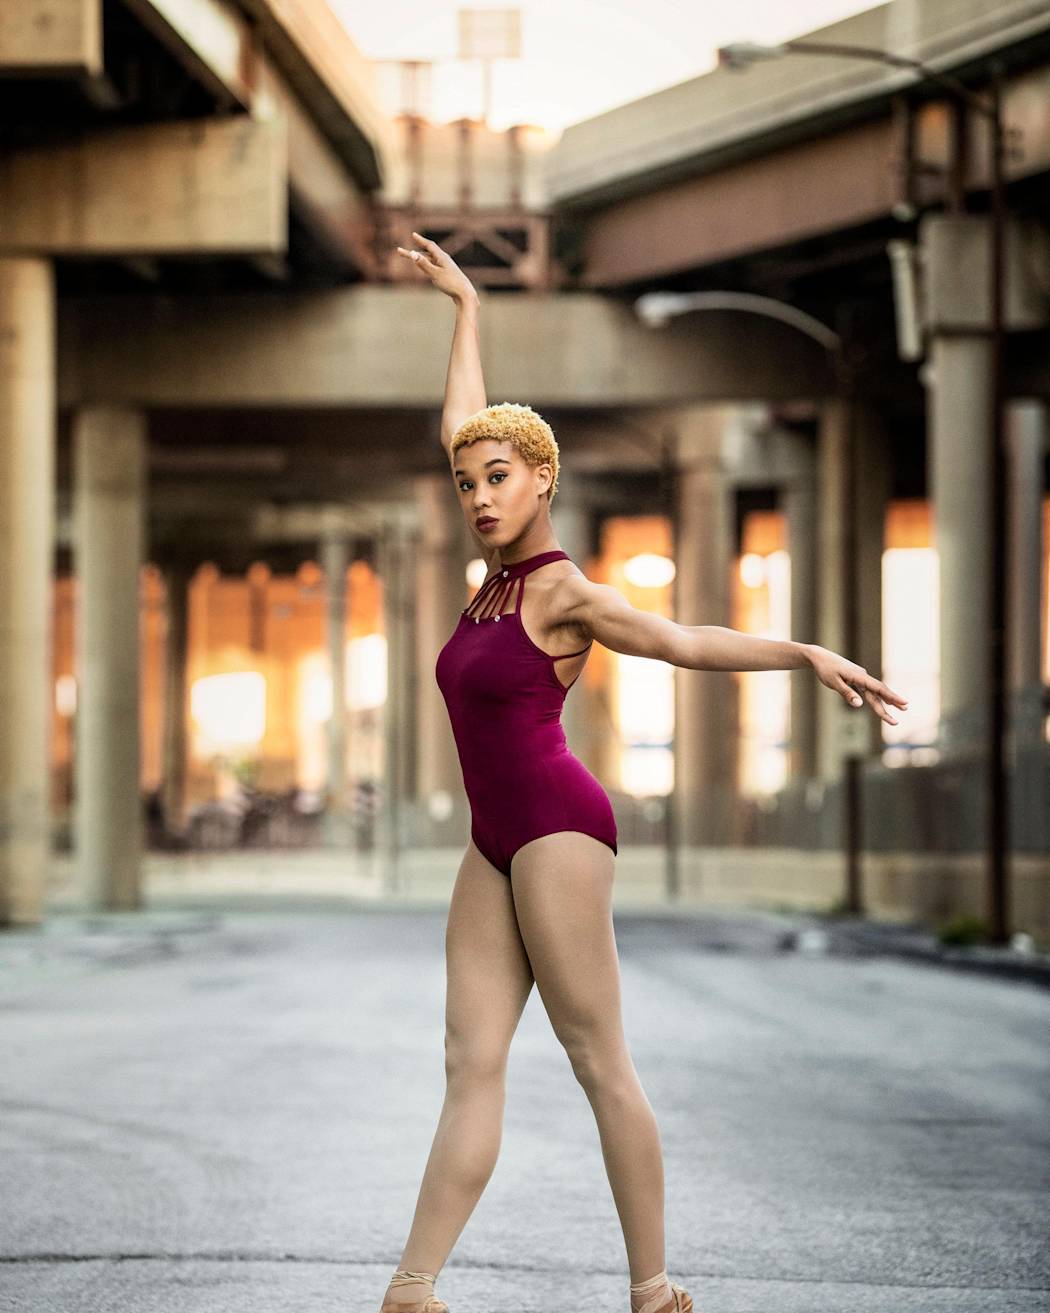 Nia Parker, 20, performs Hiplet, which marries contemporary styles like hip-hop with ballet en pointe.